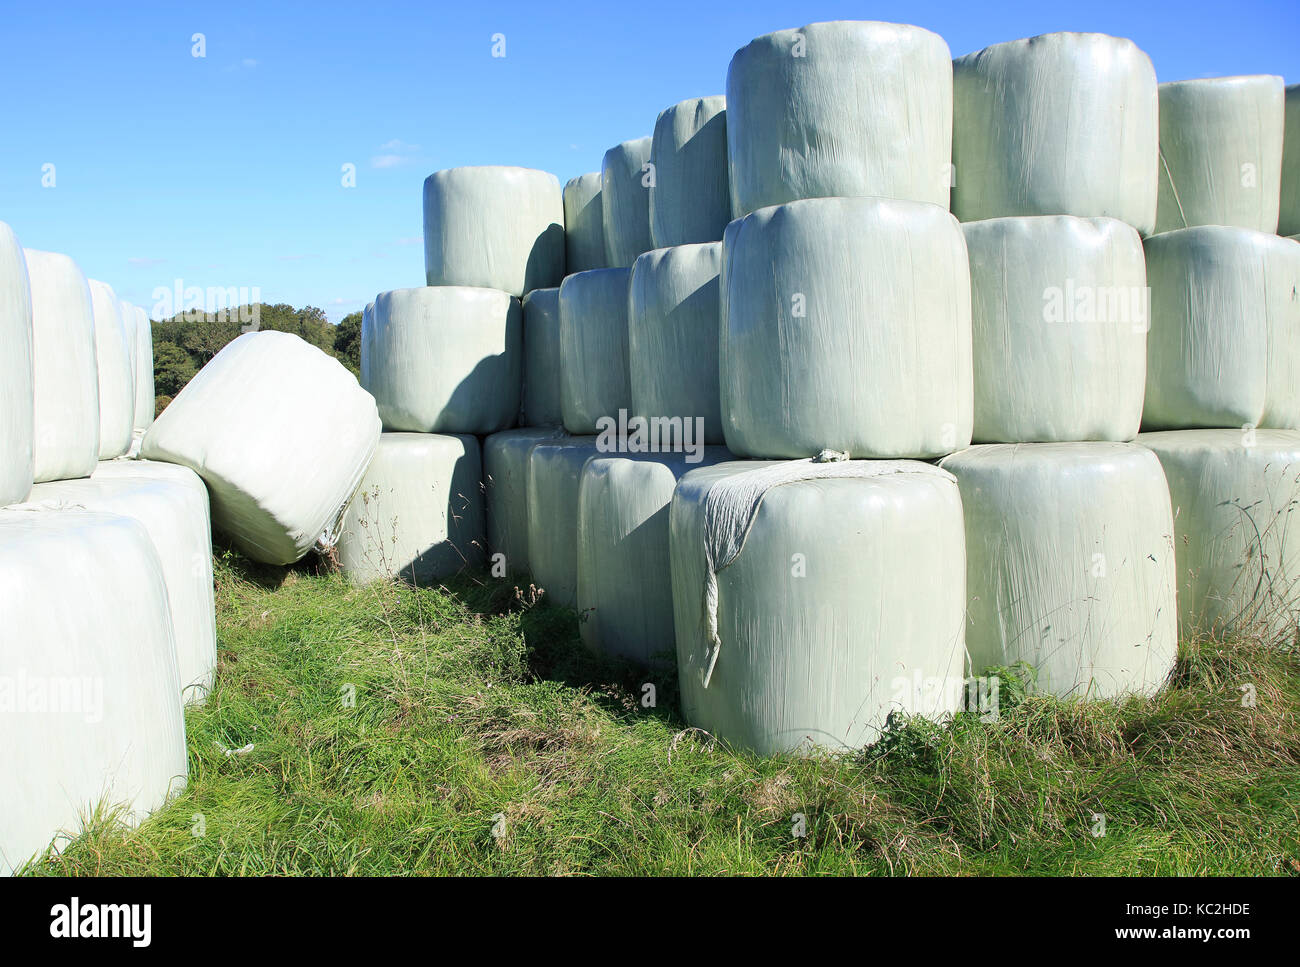 Silage bags piled up in field against blue sky, Suffolk, England, UK Stock  Photo - Alamy